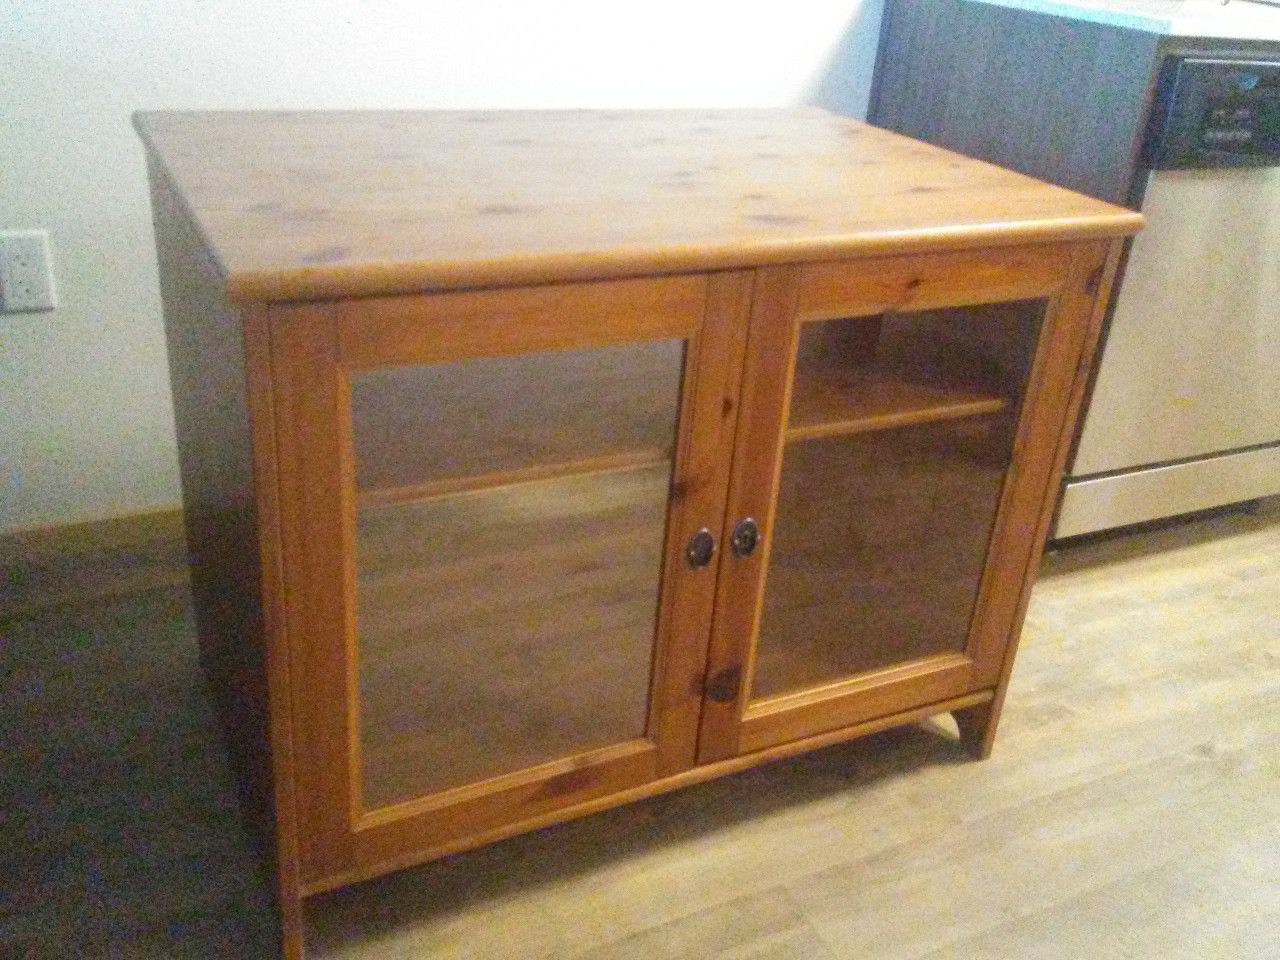 Glass door cabinet and 2 IKEA end / coffee tables